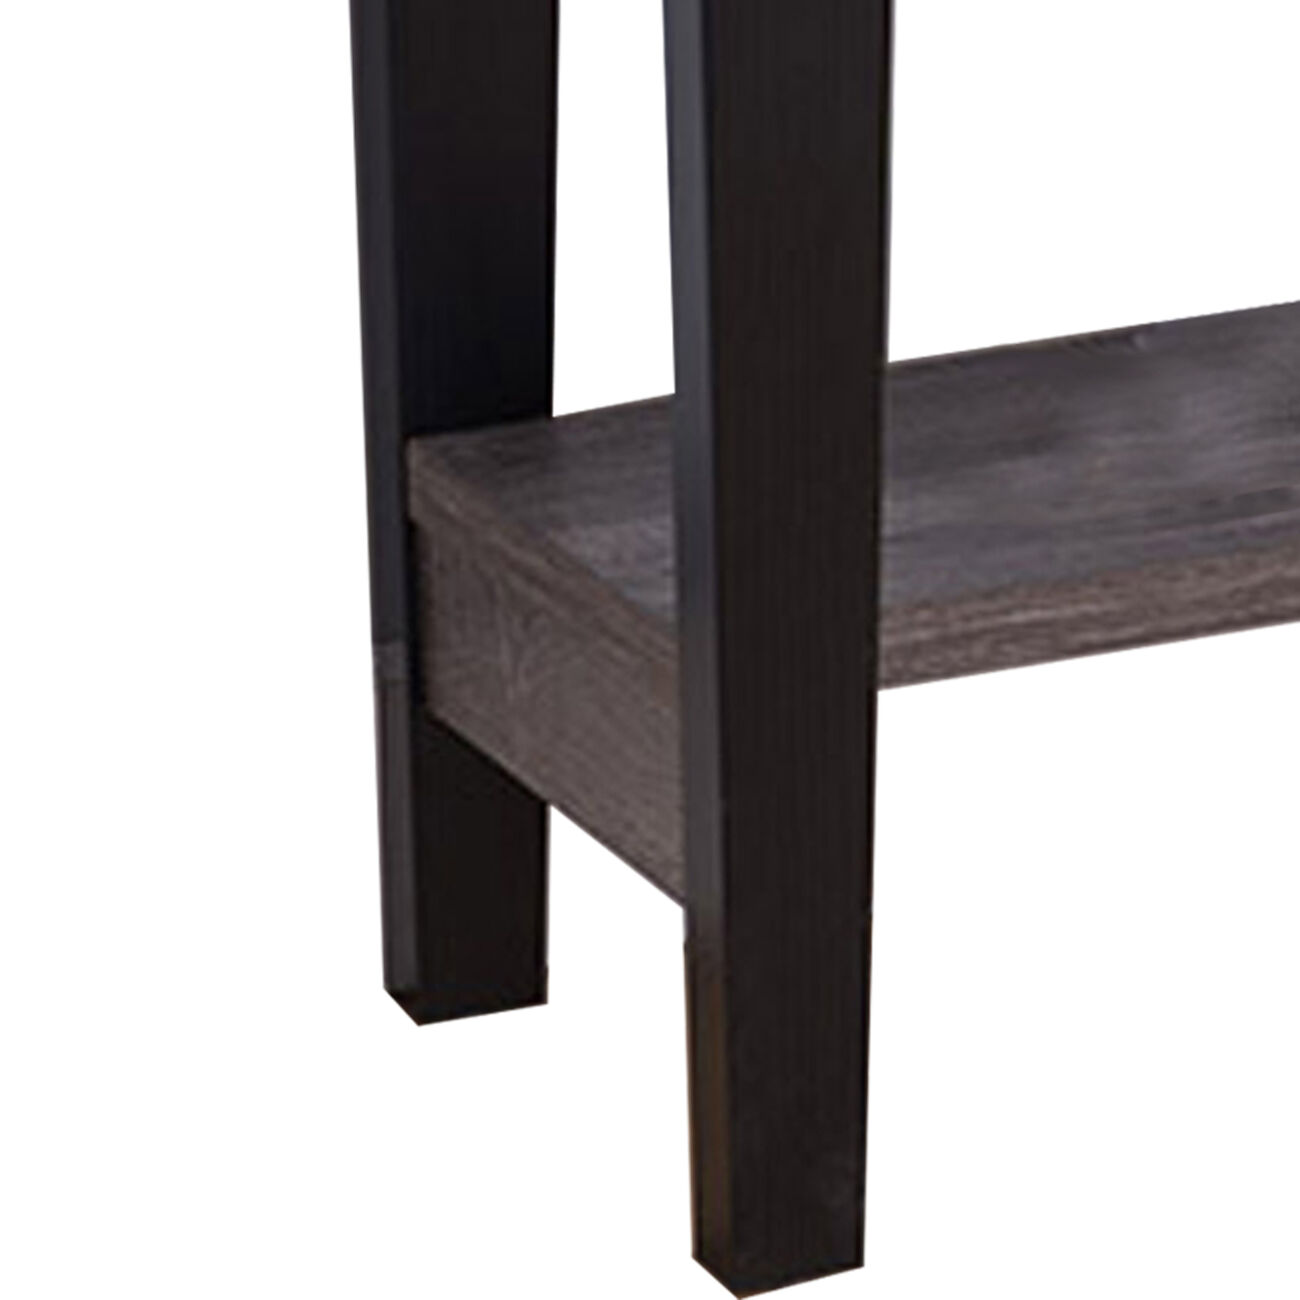 Wooden Console Table With Bottom Shelf, Black And Gray